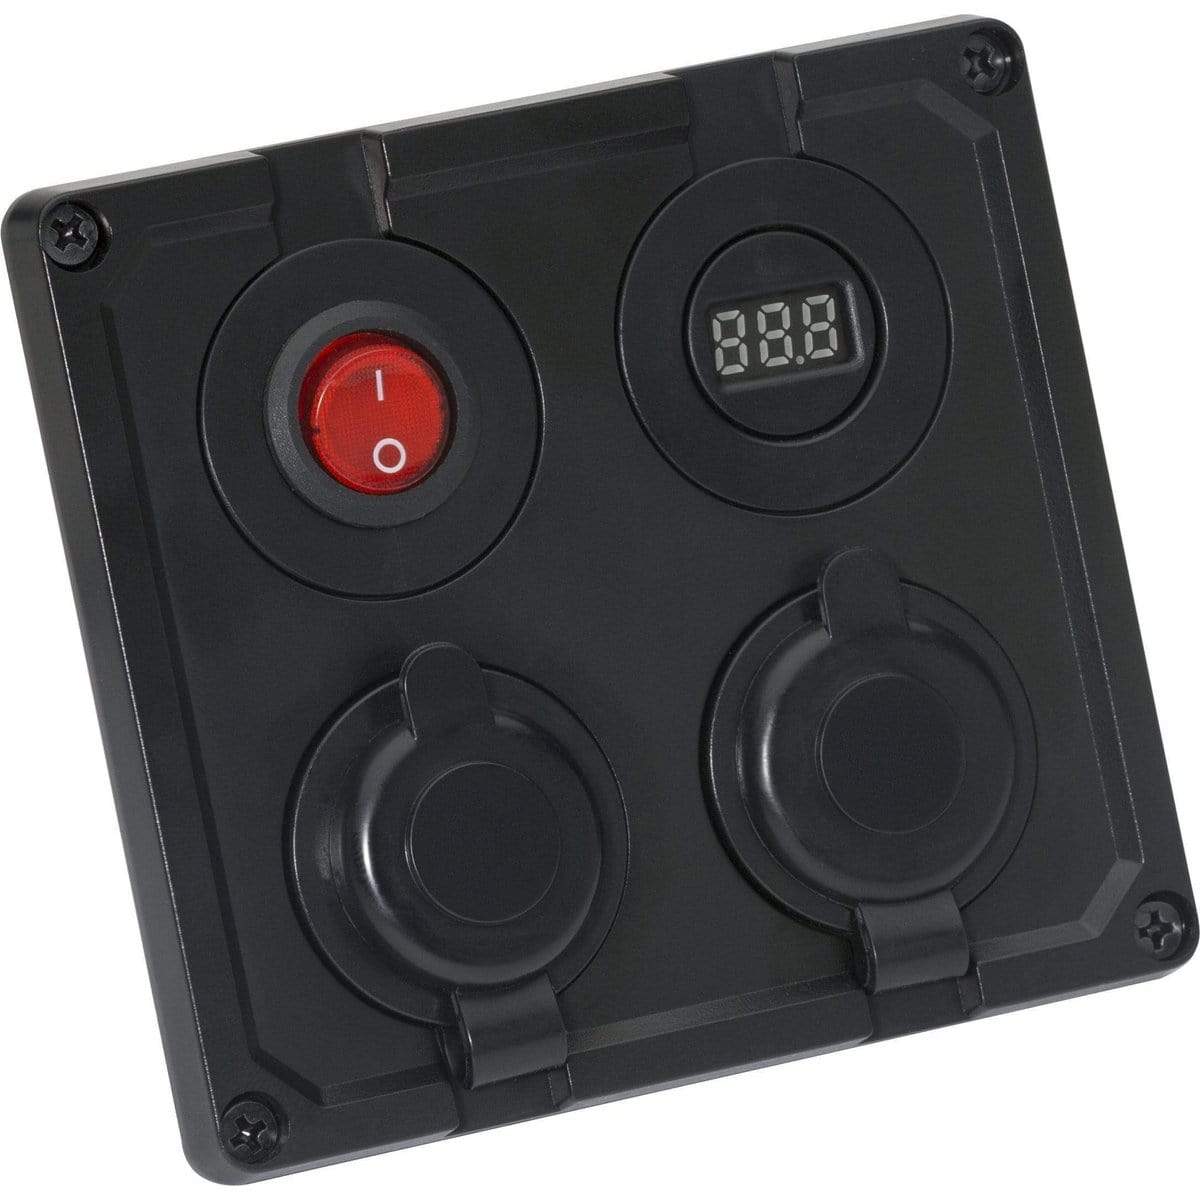 Attwood Marine Qualifies for Free Shipping Attwood Marine Plate-USB 12v Voltmeter #14264-6